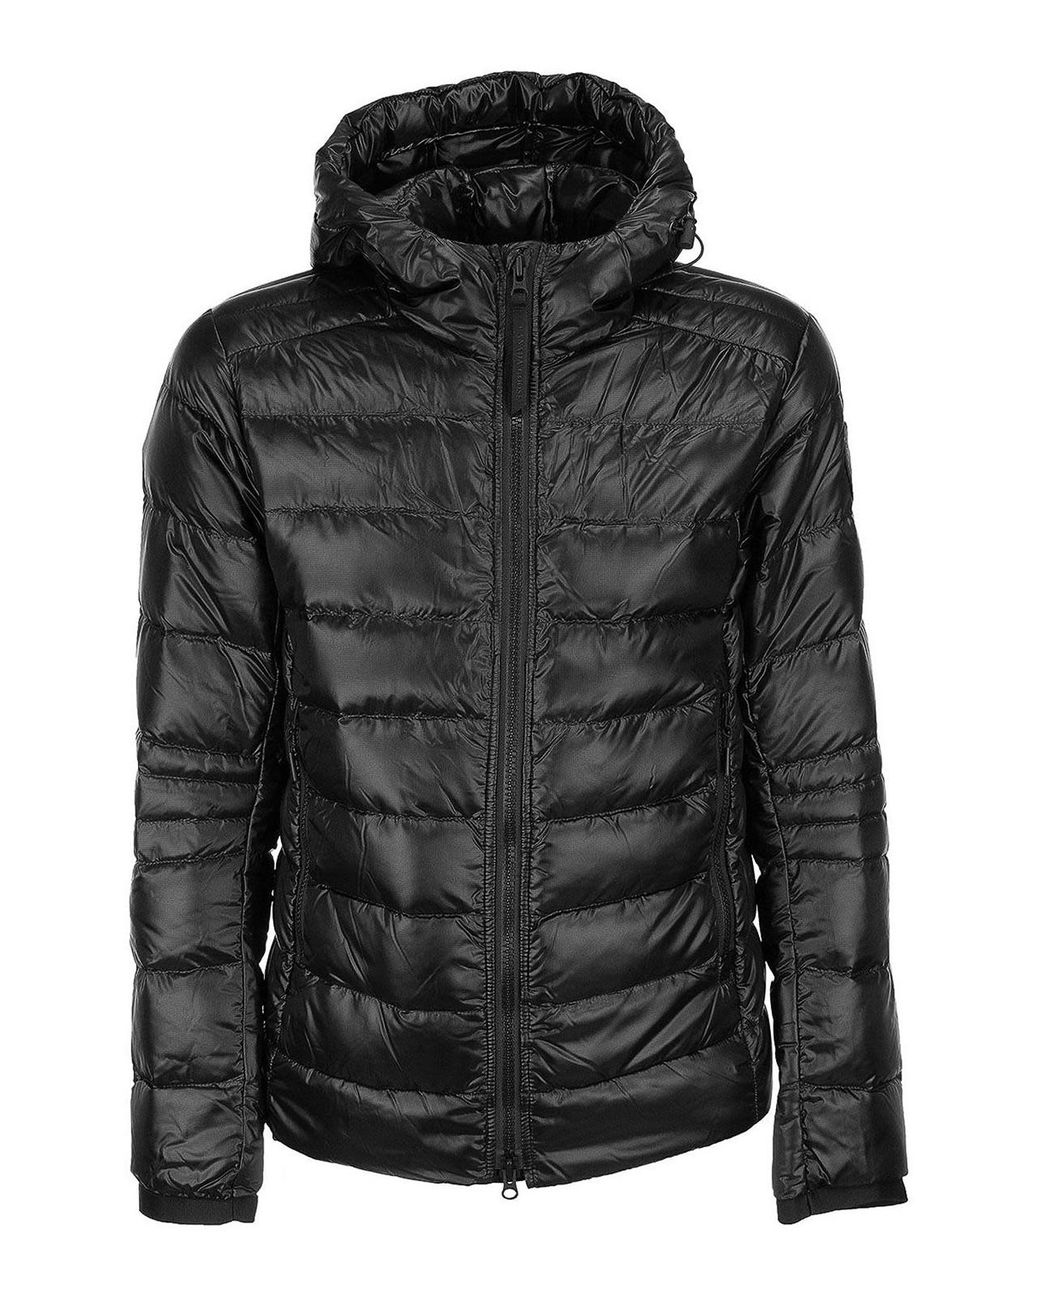 Canada Goose Crofton Hooded Puffer Jacket in Black for Men - Lyst